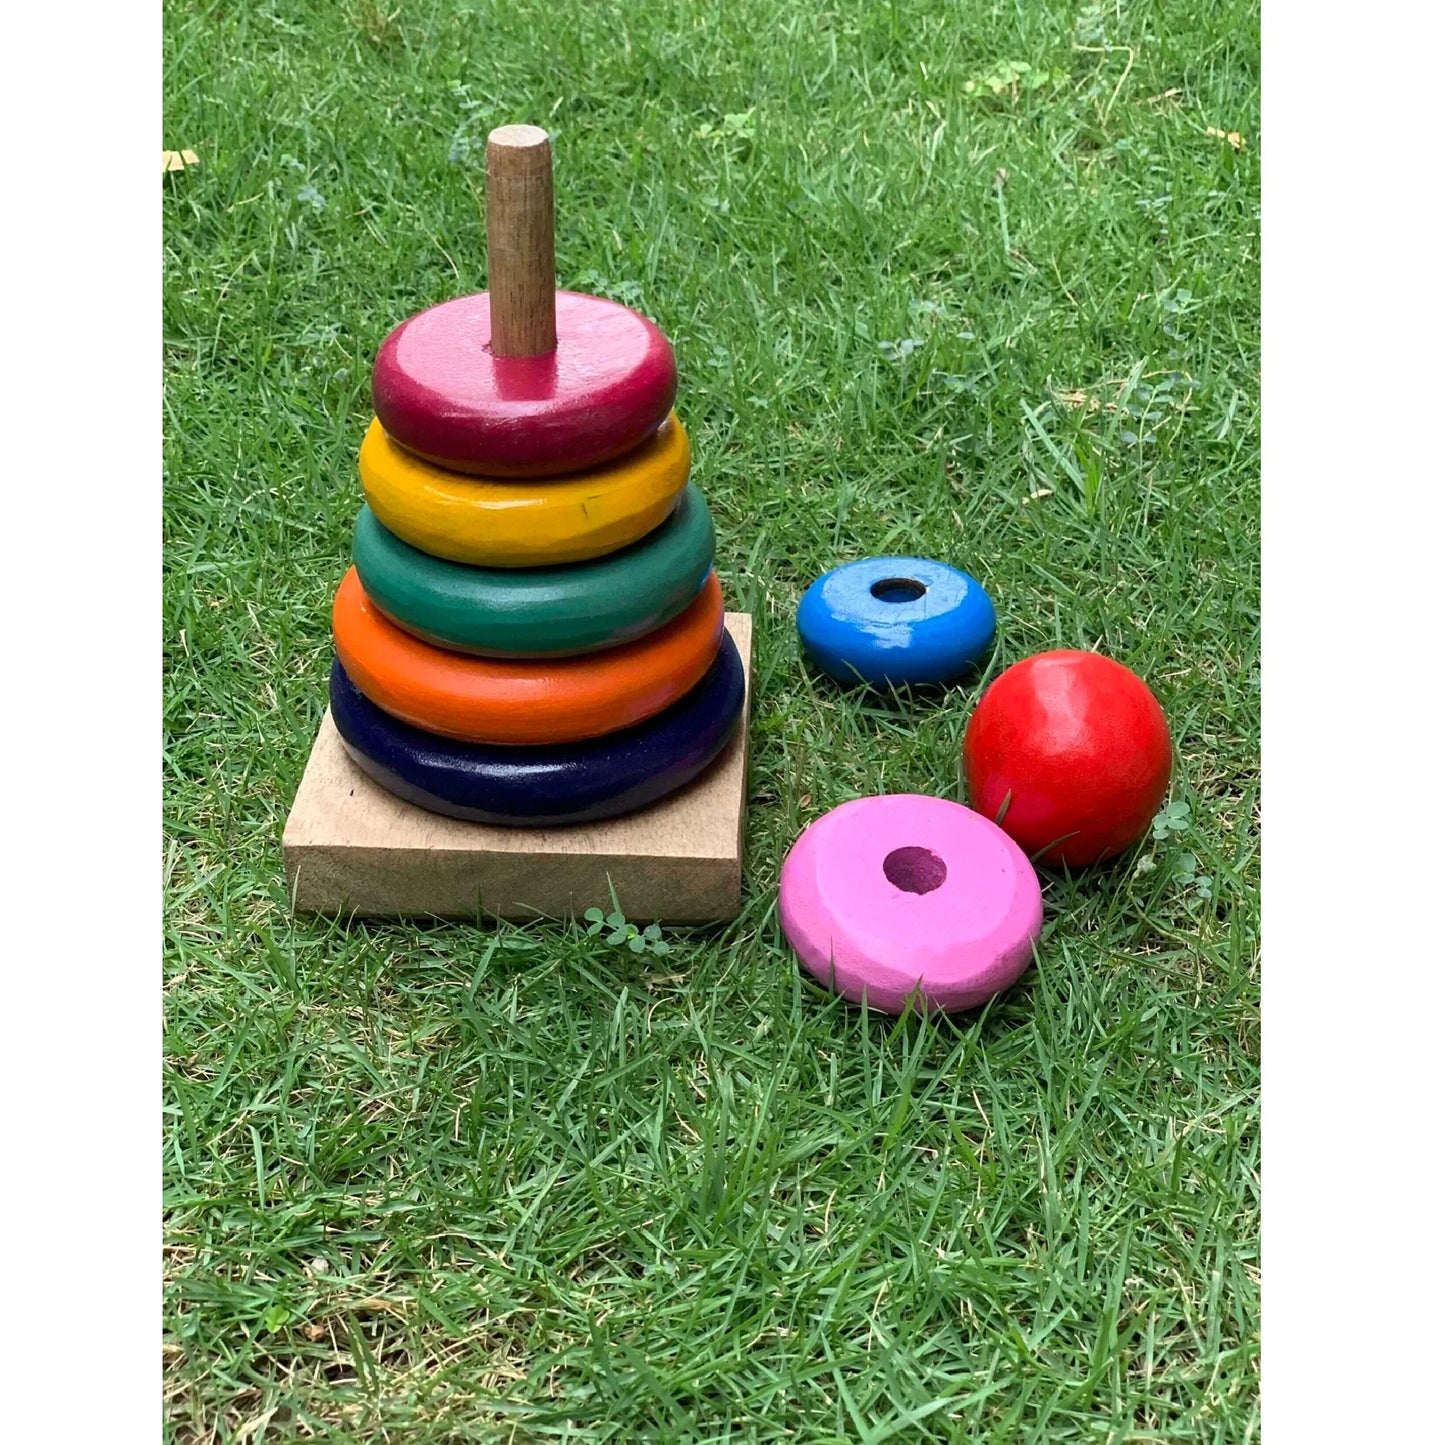 Buy Rainbow Wooden Stacker - Fun Learning Toy - SkilloToys.com